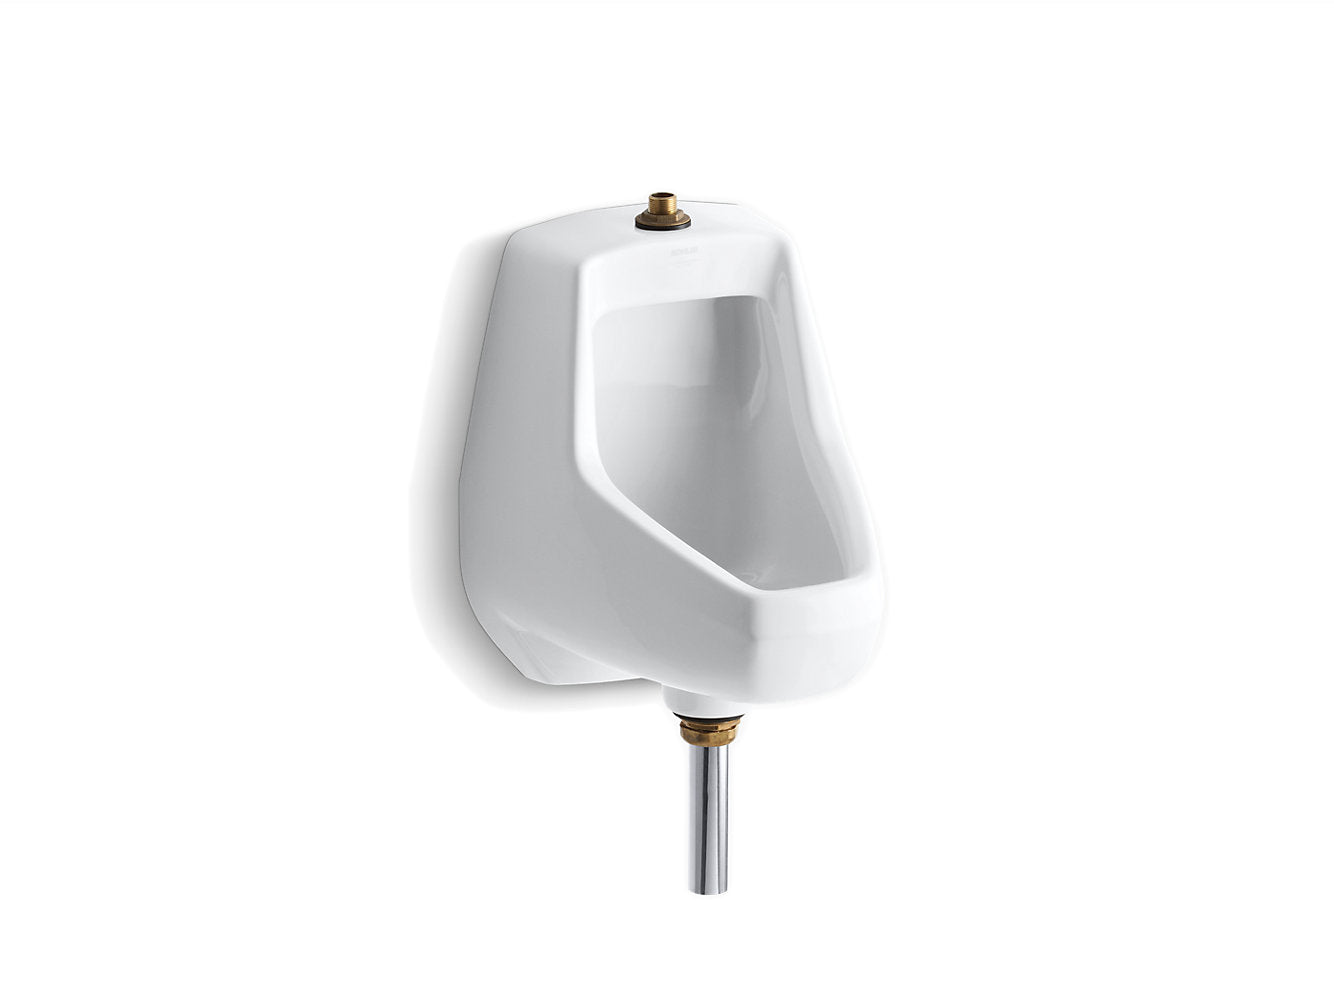 Kohler Darfield Washdown Wall-Mount 1/2 Gpf Urinal With Top Spud And Bottom Outlet For Exposed P-Trap